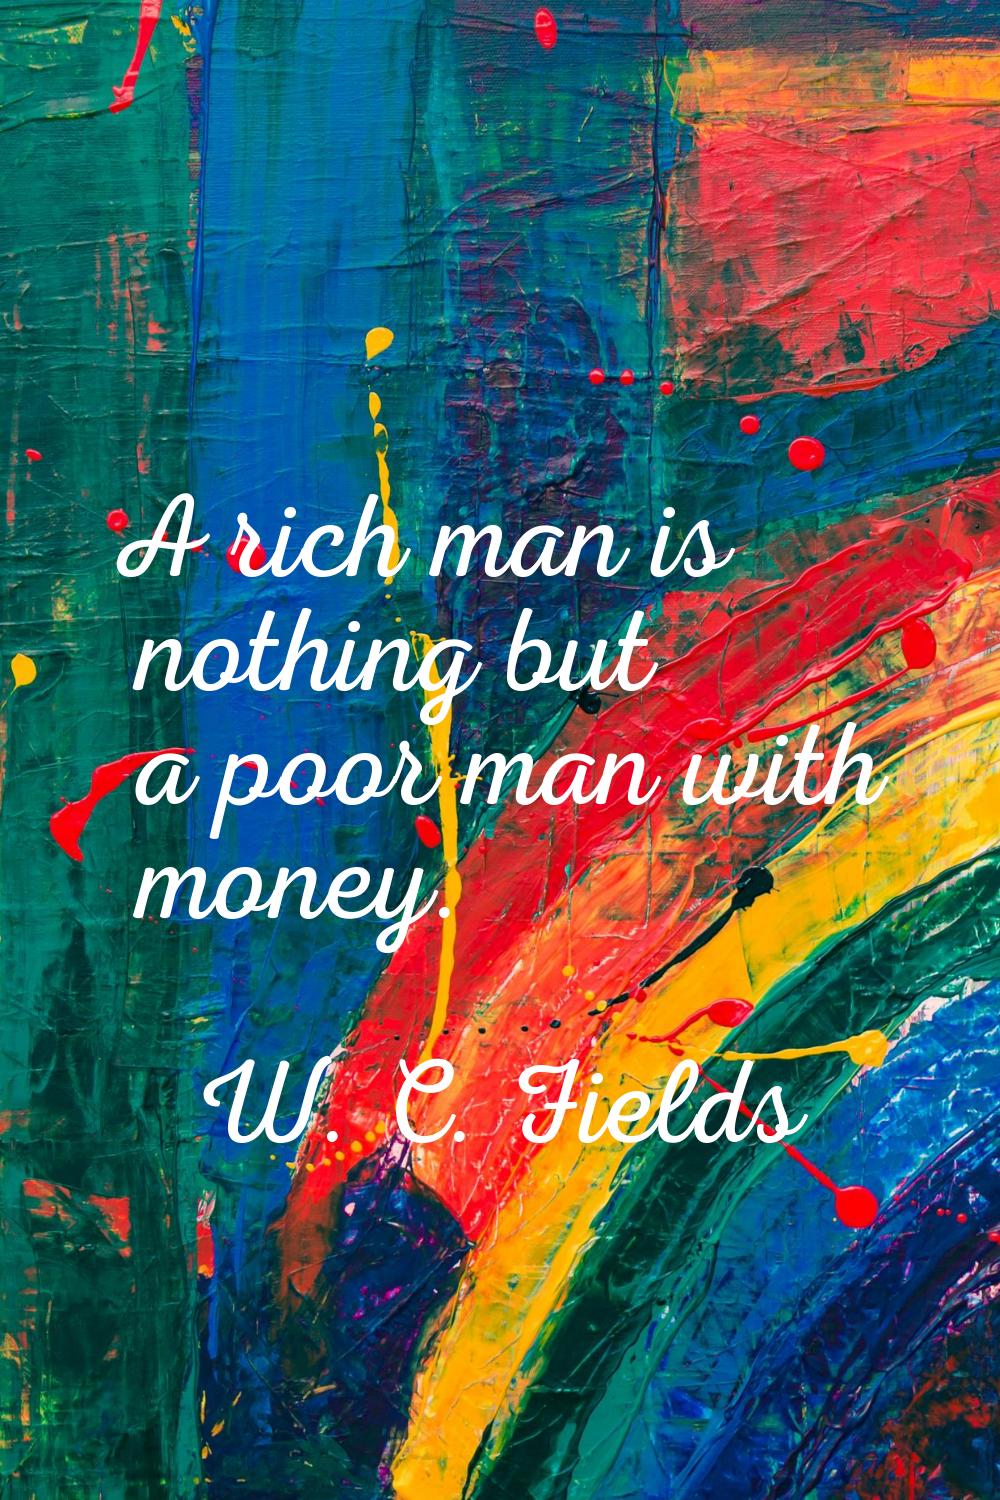 A rich man is nothing but a poor man with money.